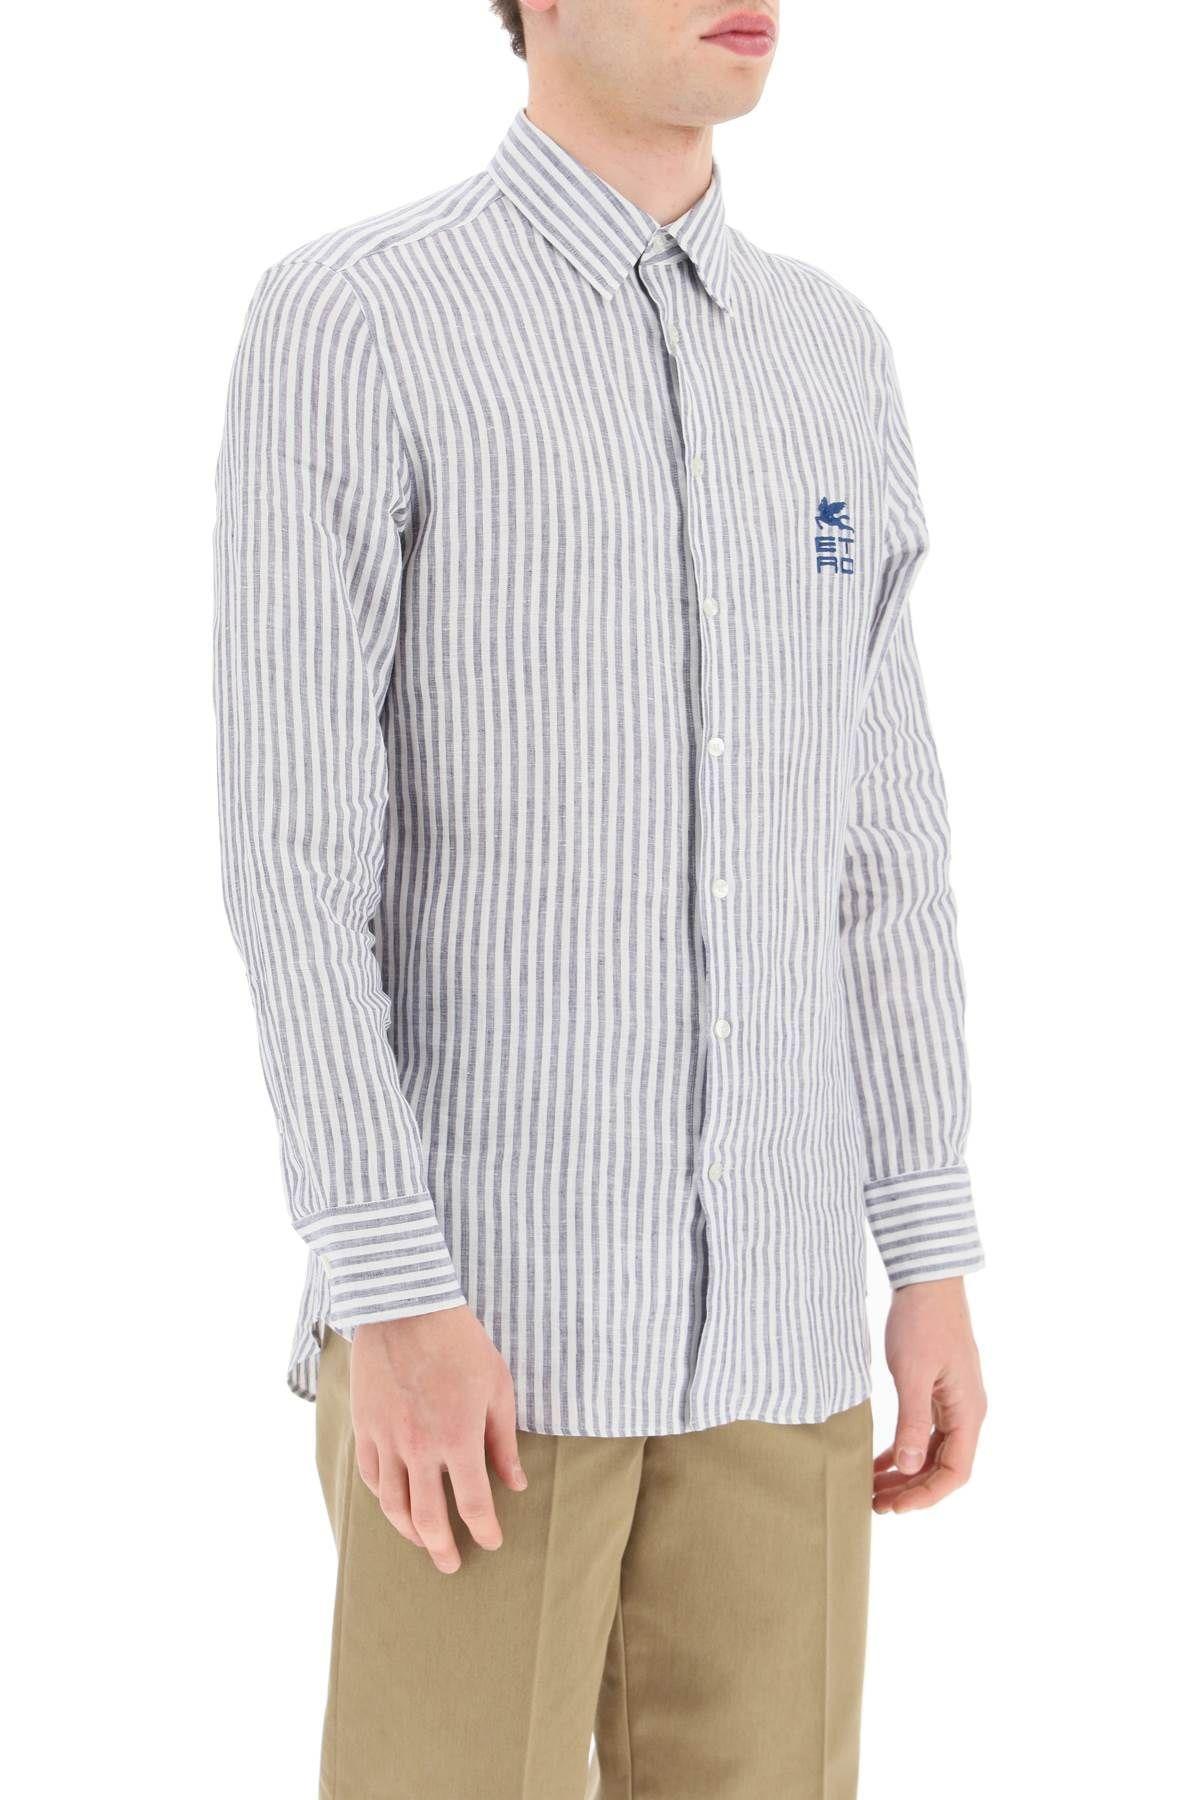 ETRO STRIPED LINEN SHIRT WITH CUBE LOGO